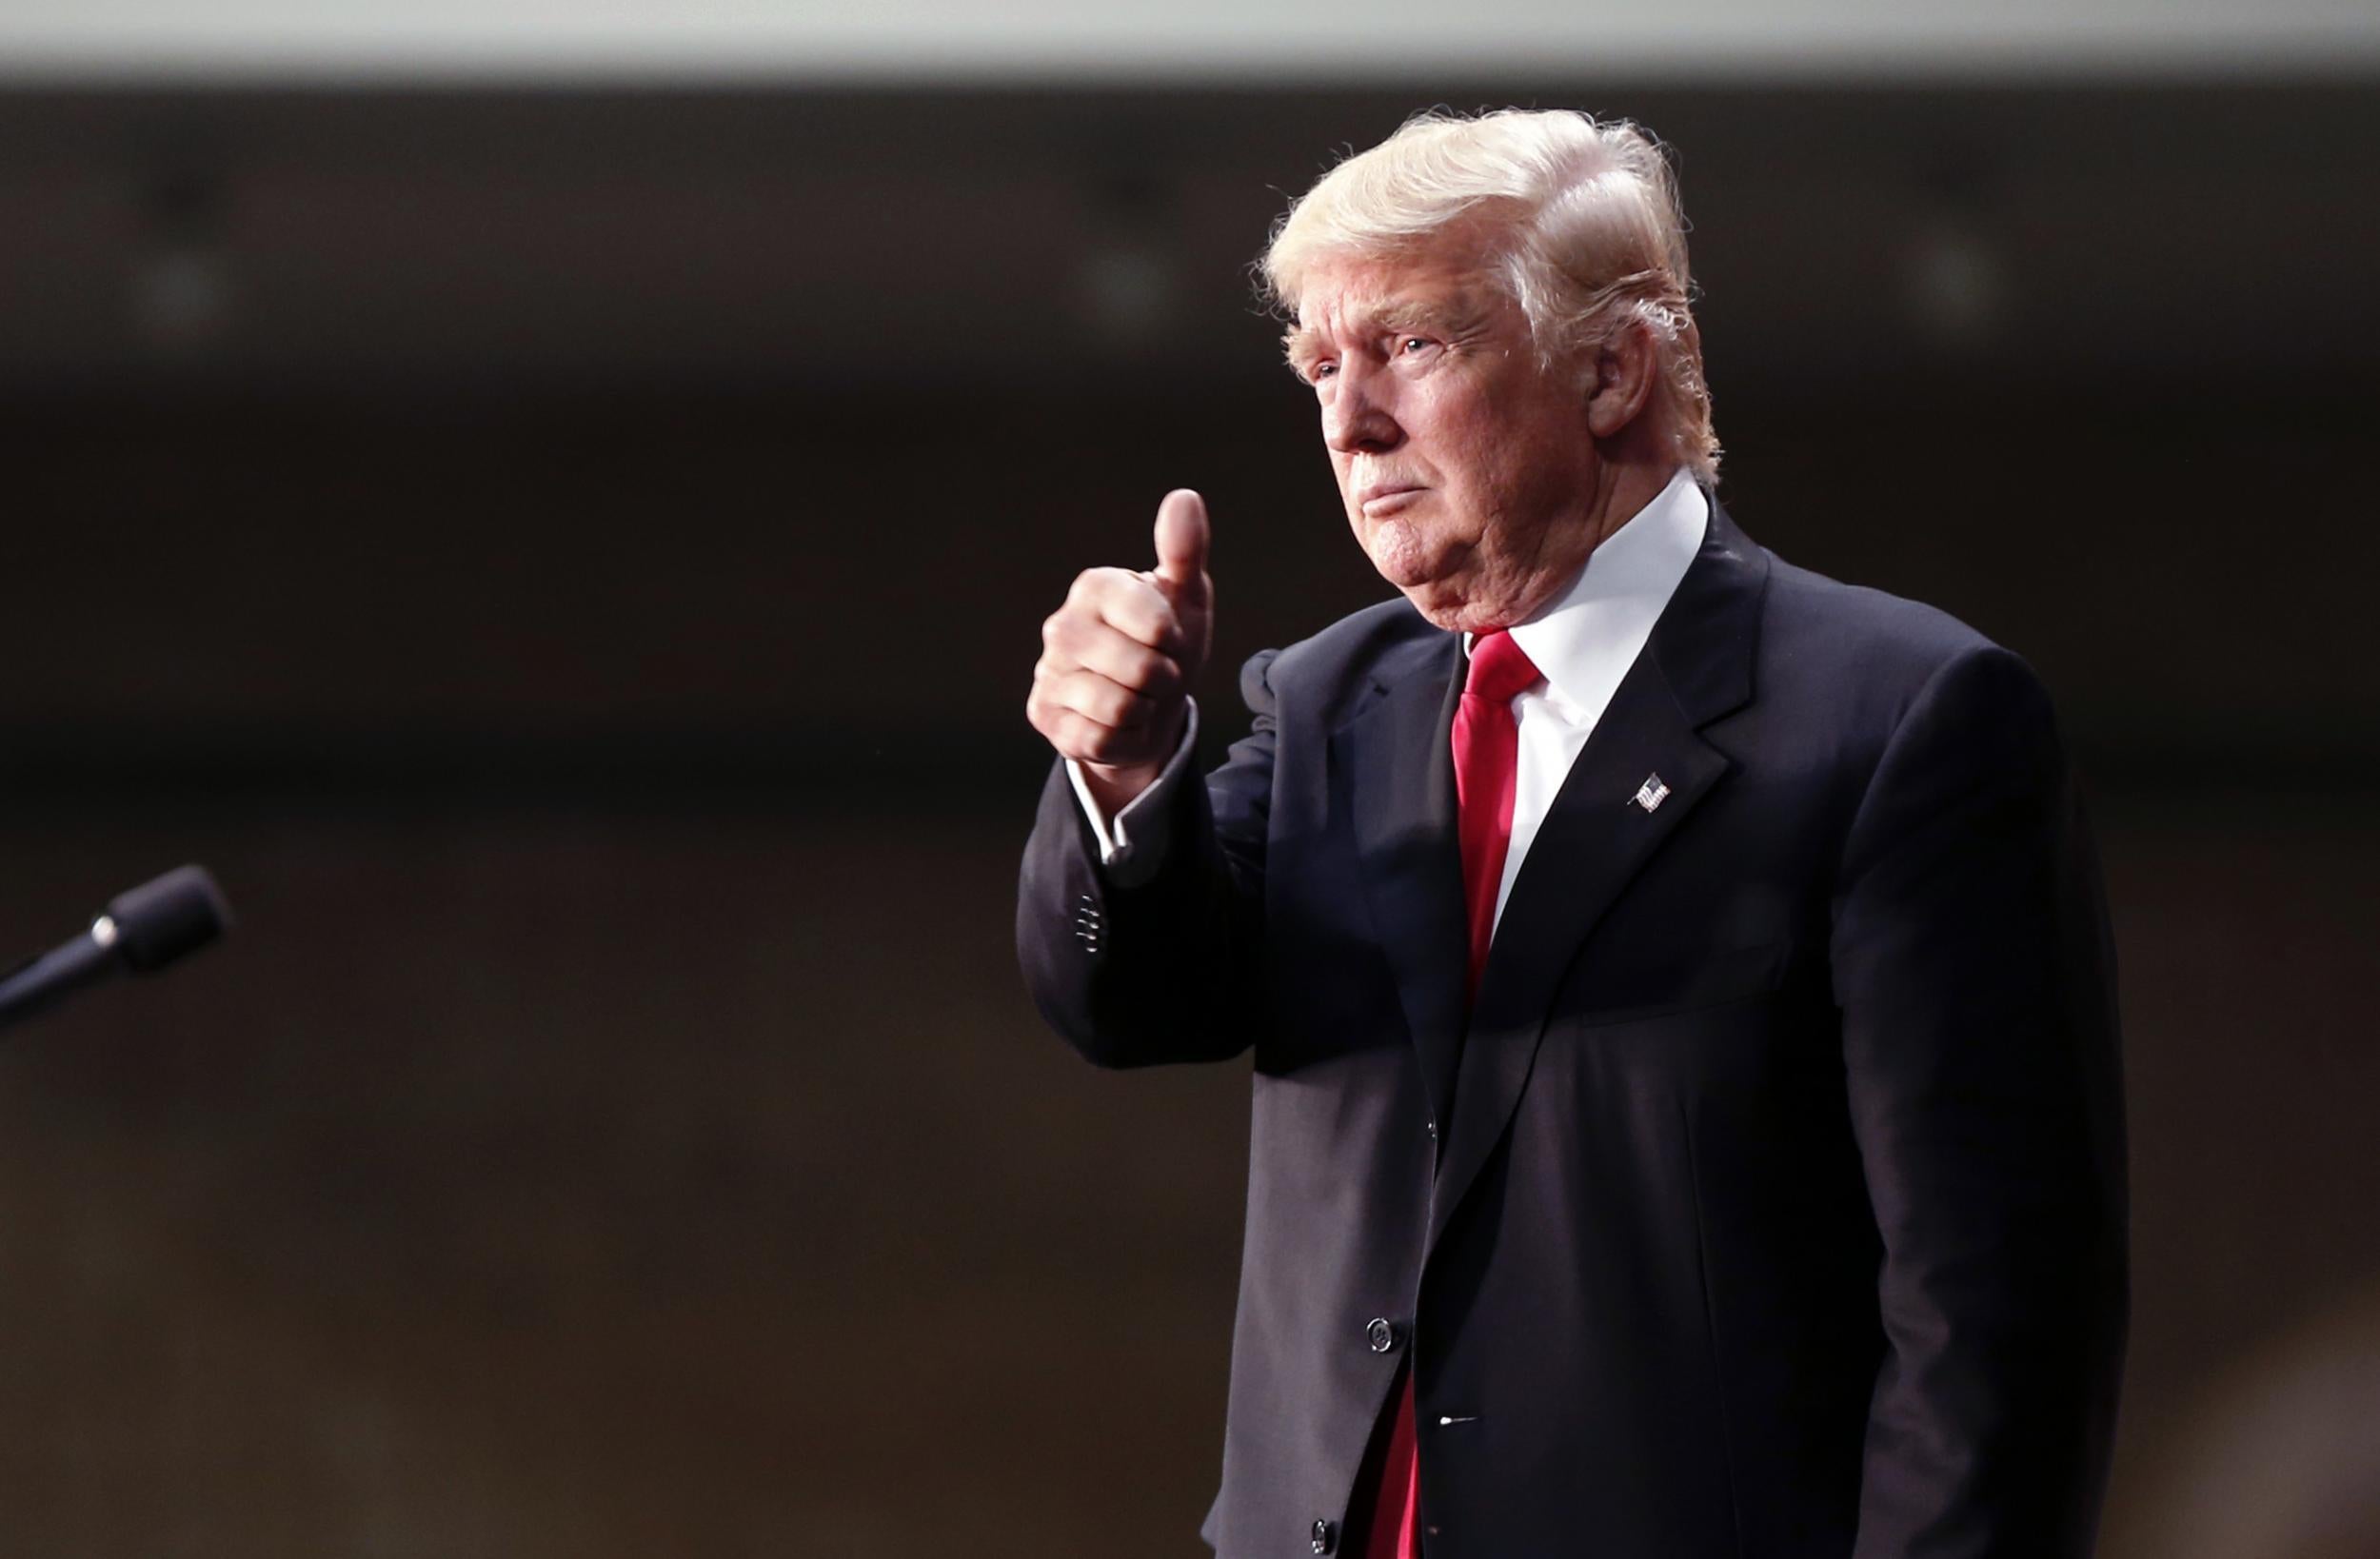 Donald Trump finishes delivering his speech in Charlotte, North Carolina, where he expressed regret for some of his comments earlier in the campaign